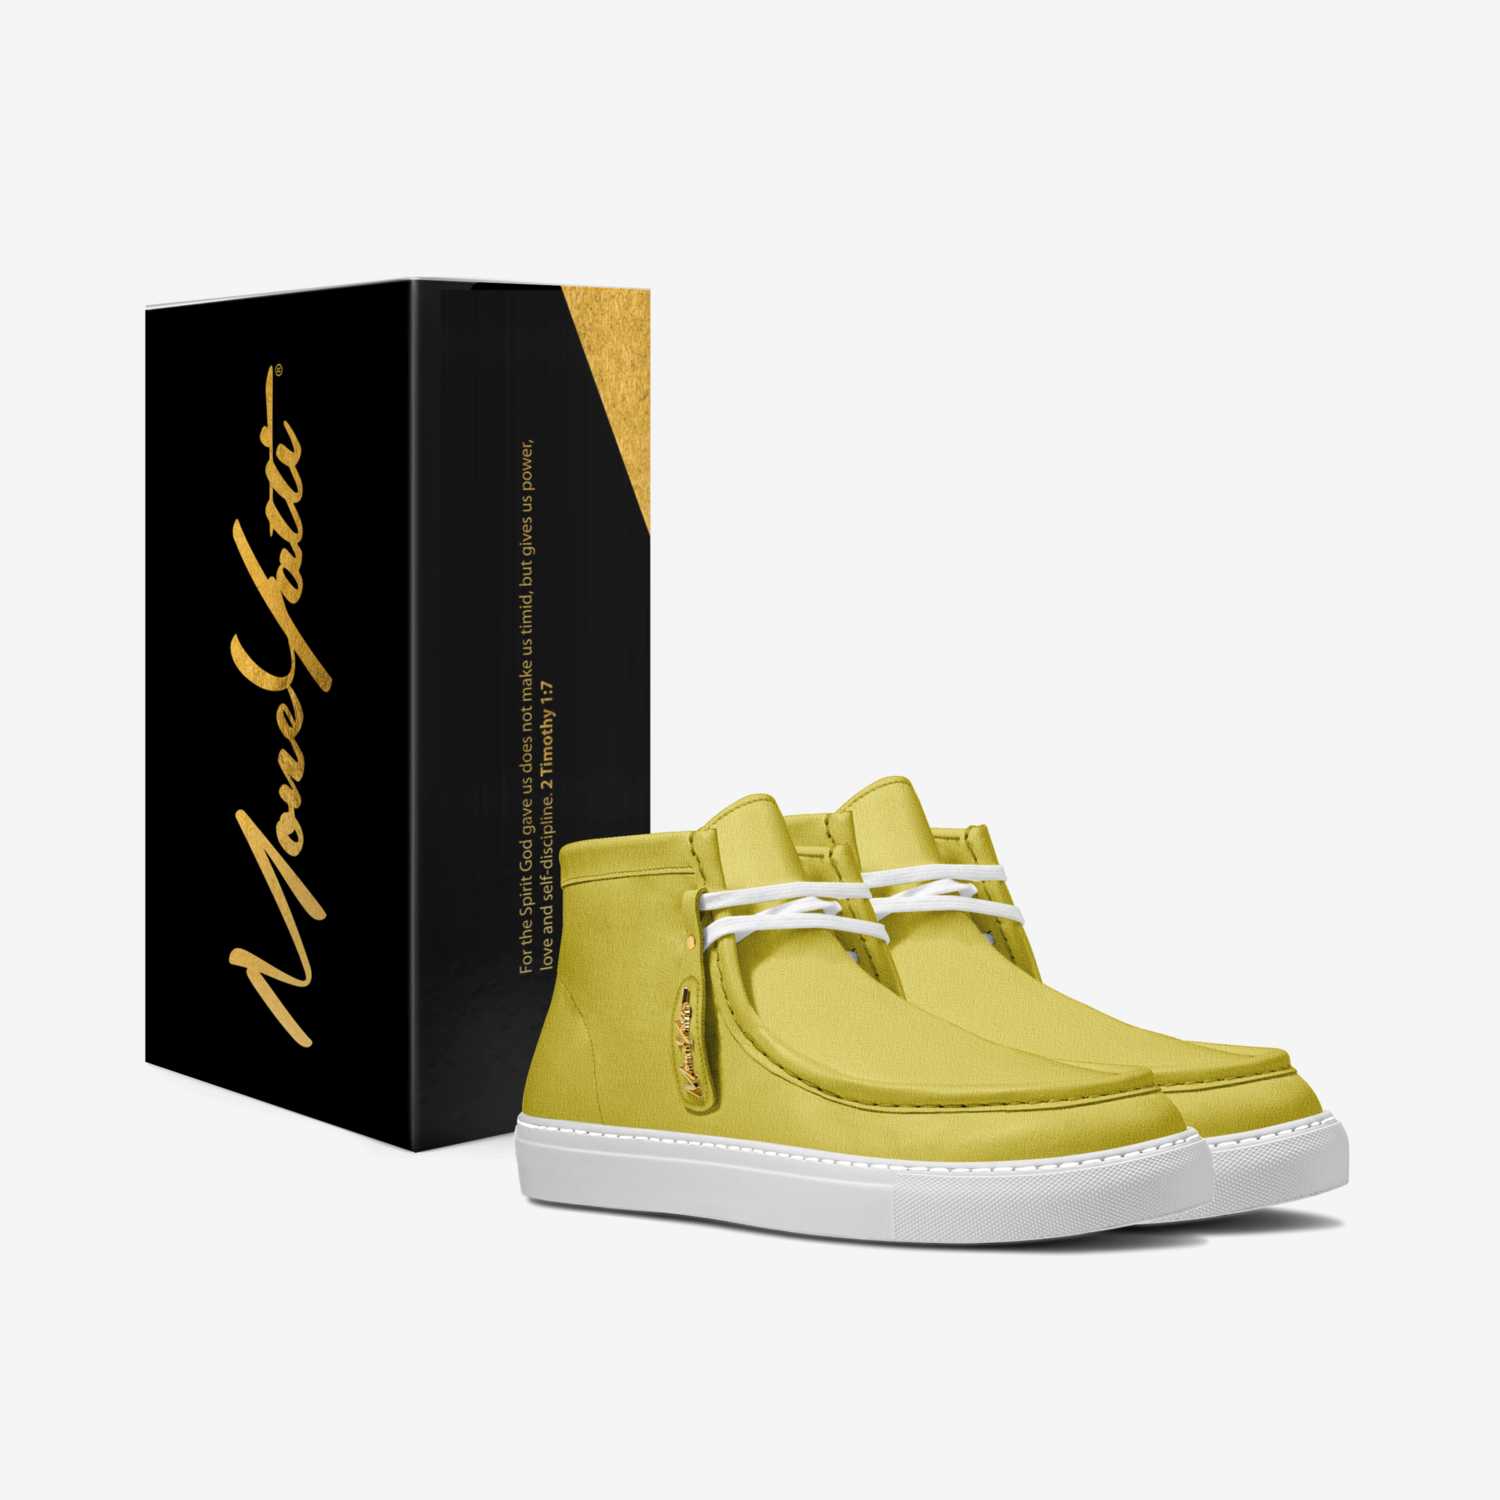 LUX SUEDE 001 custom made in Italy shoes by Moneyatti Brand | Box view